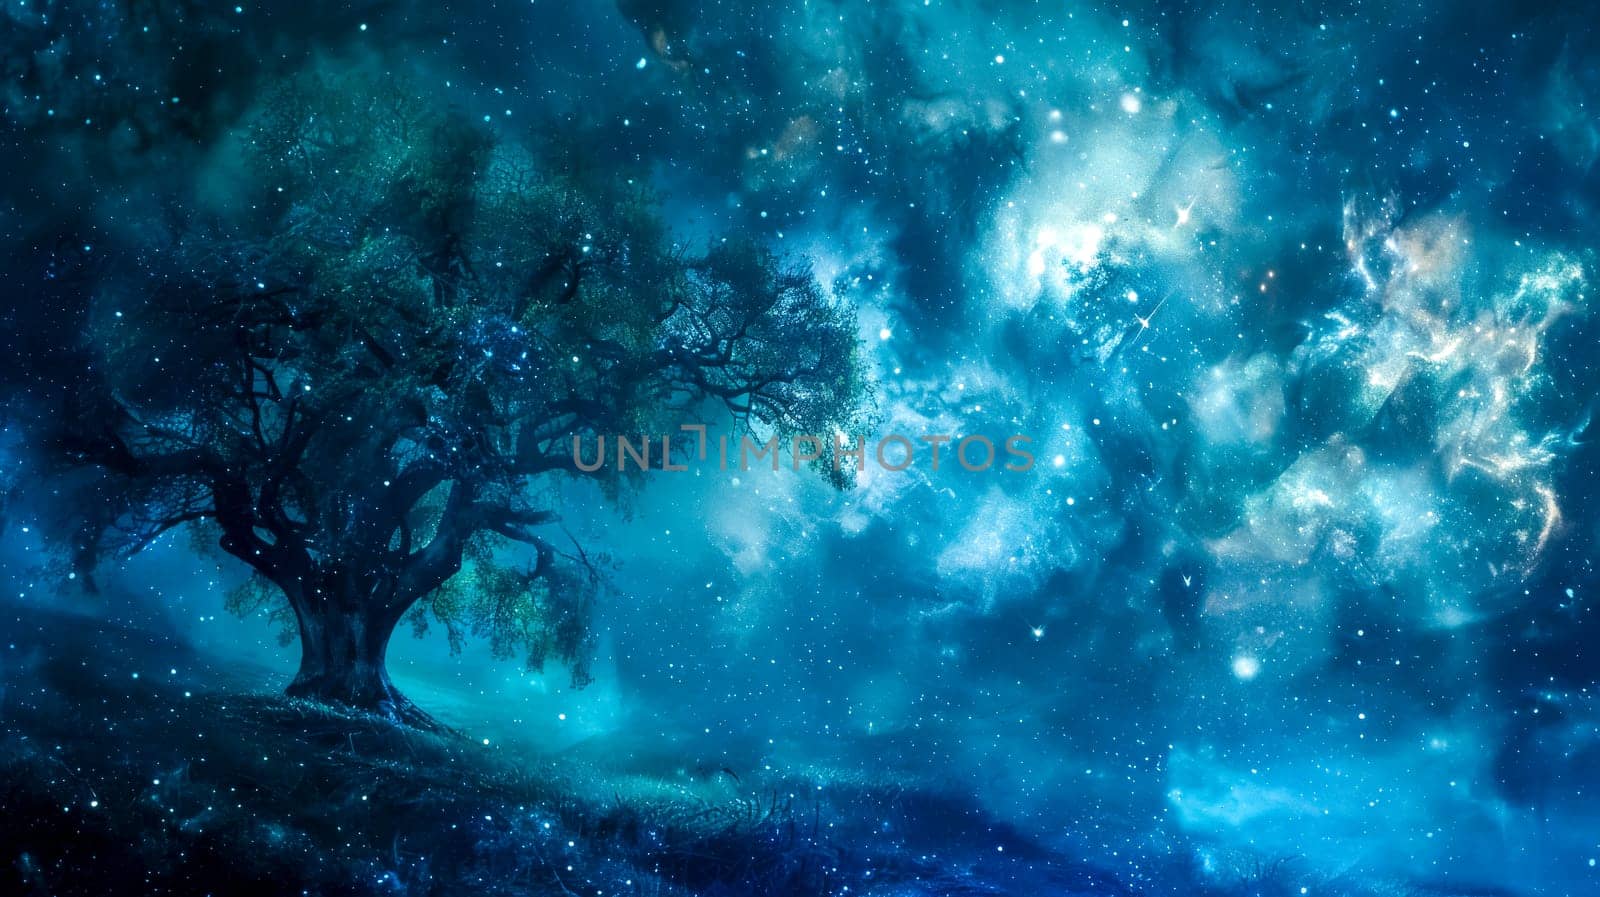 Mystical tree stands amidst a starry cosmos, creating an ethereal dreamscape by Edophoto